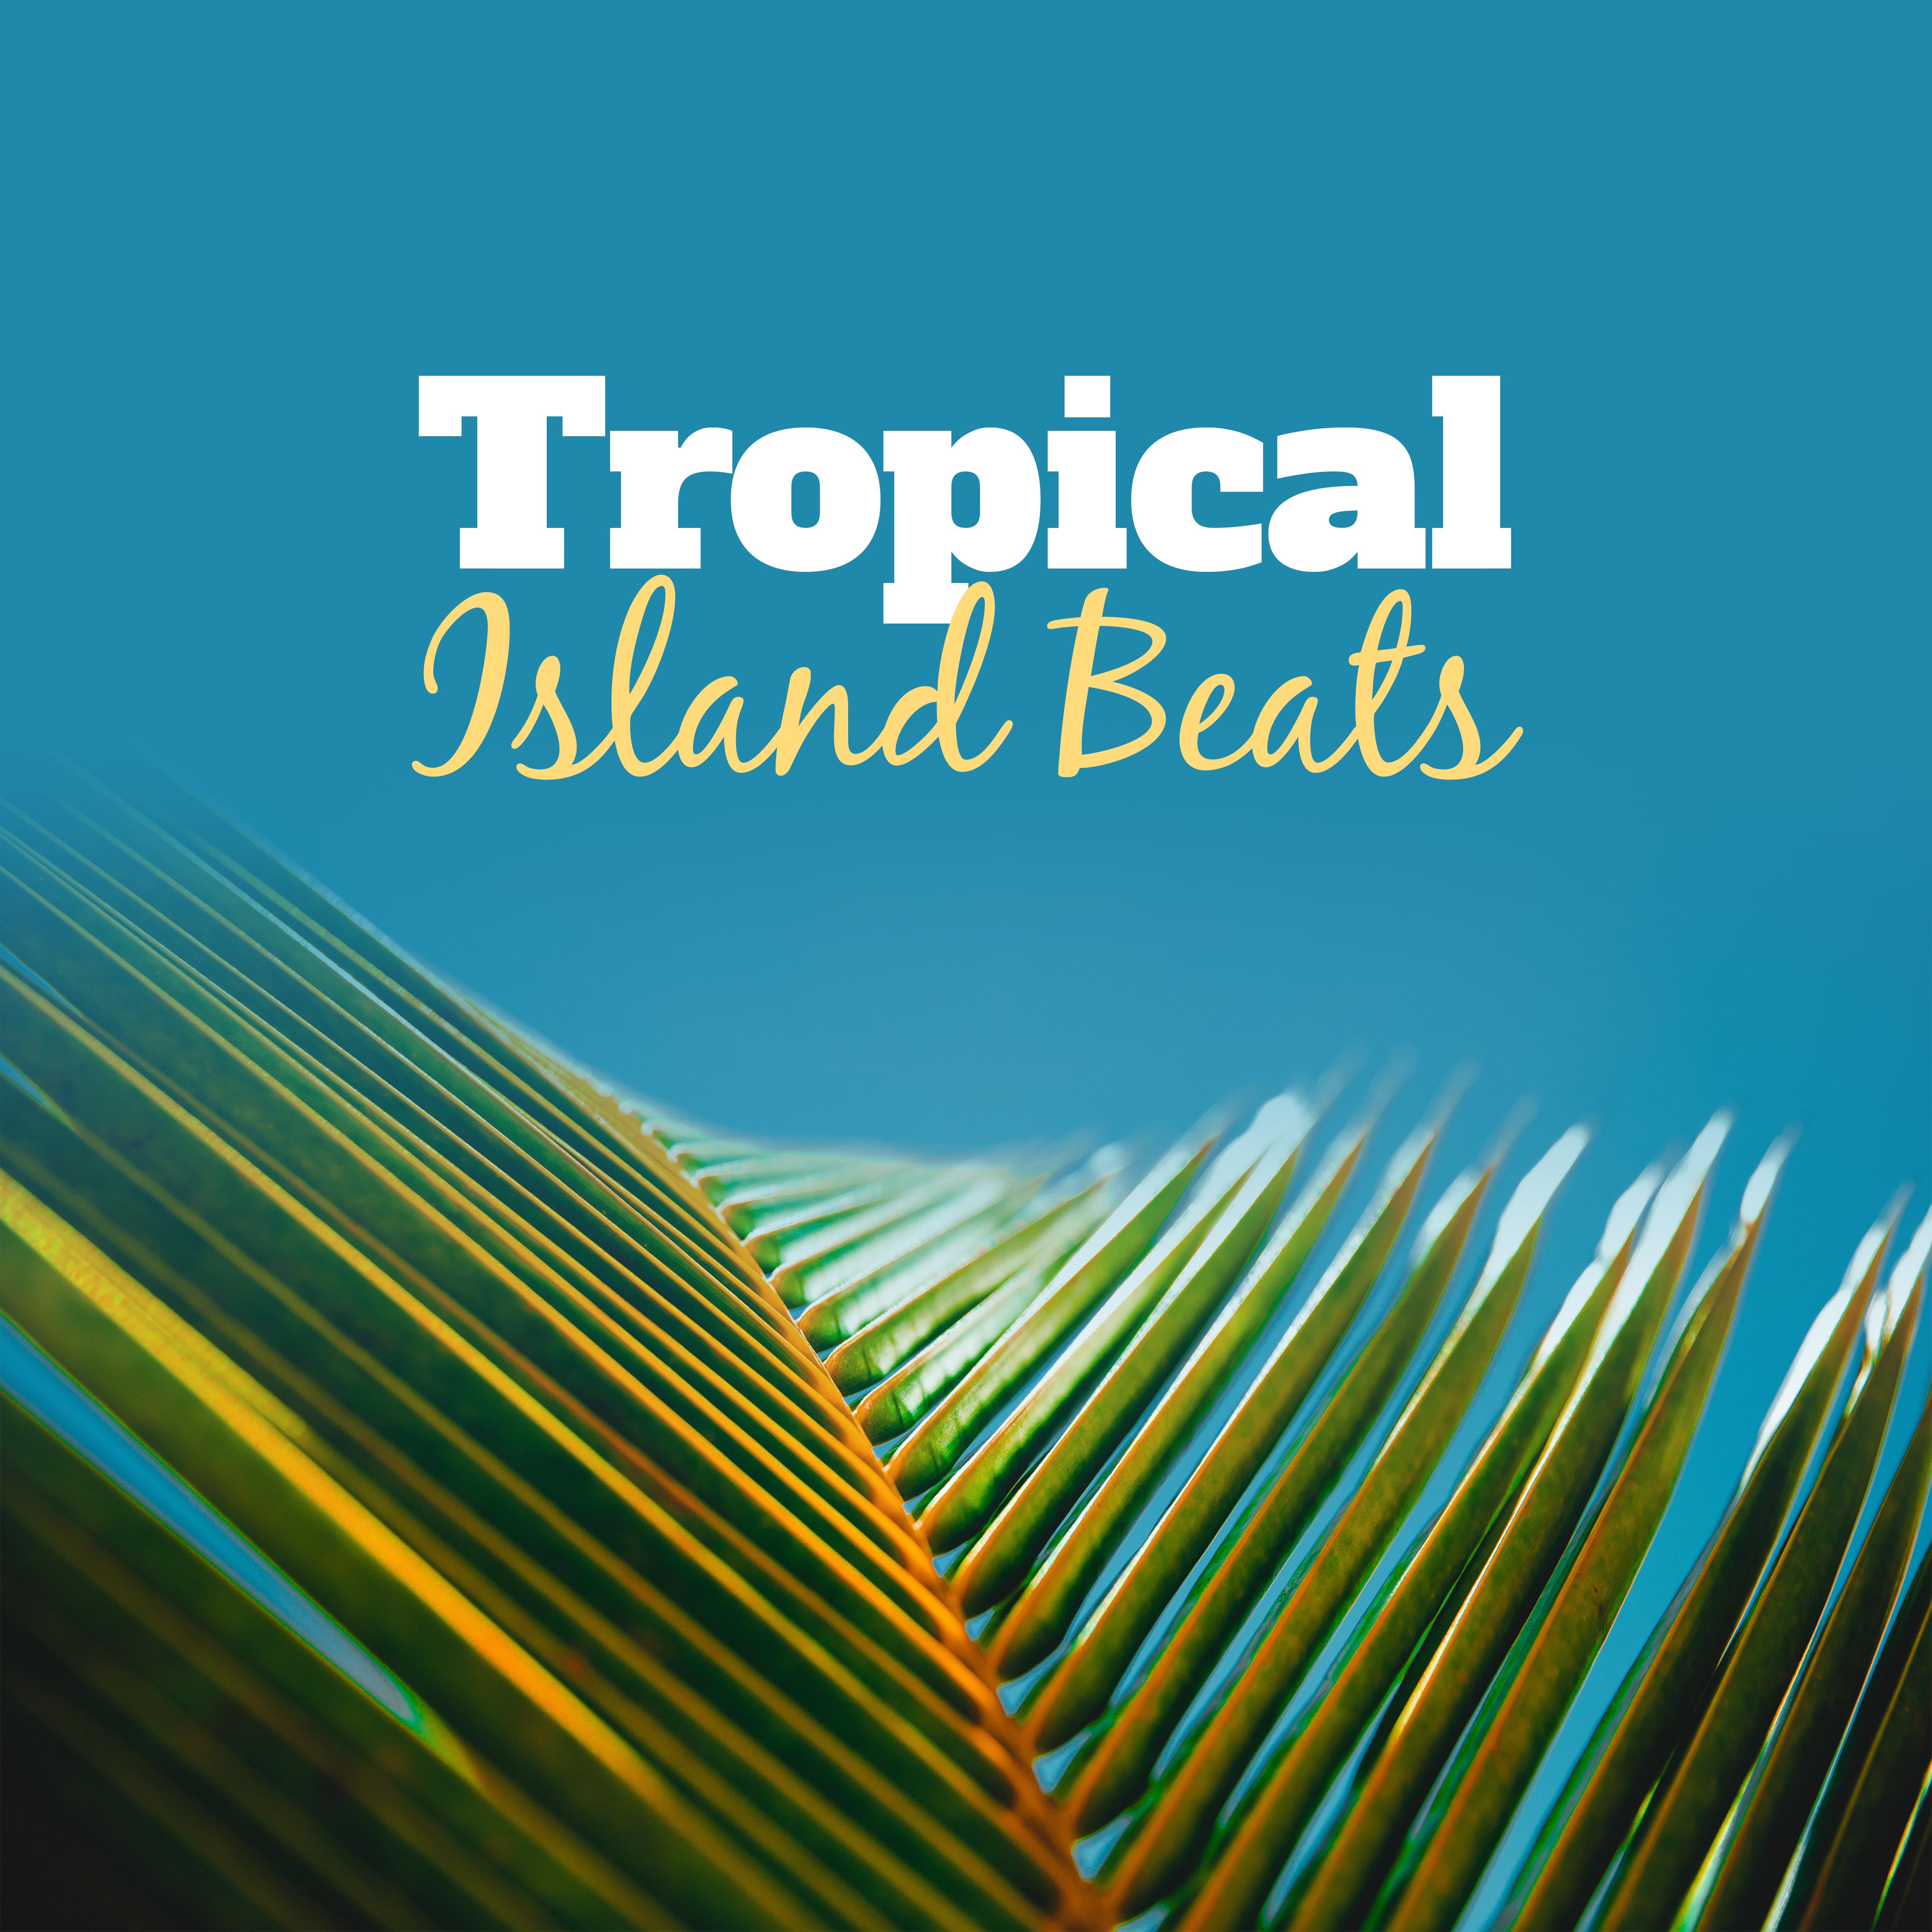 Tropical Island Beats – Summer Relaxing Time, Easy Listening, Chill Out Music, Holiday Vibes